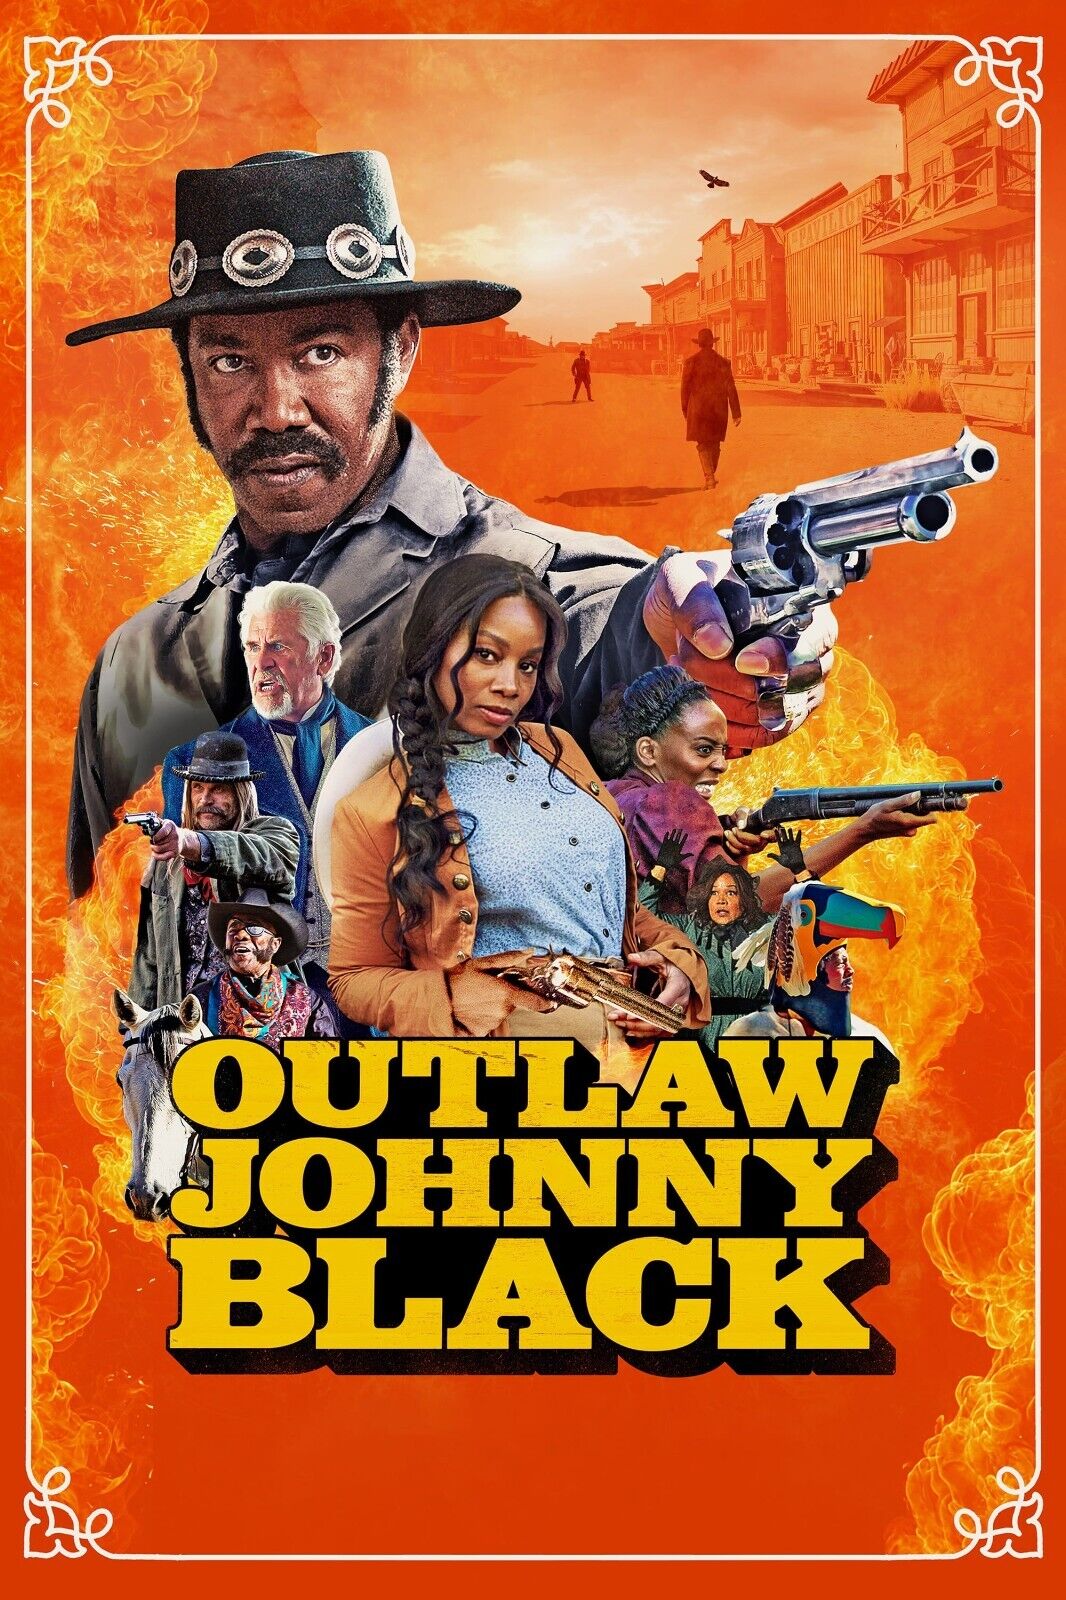 Outlaw Johnny Black Movie Poster 2023 - 11x17 Inches | NEW USA